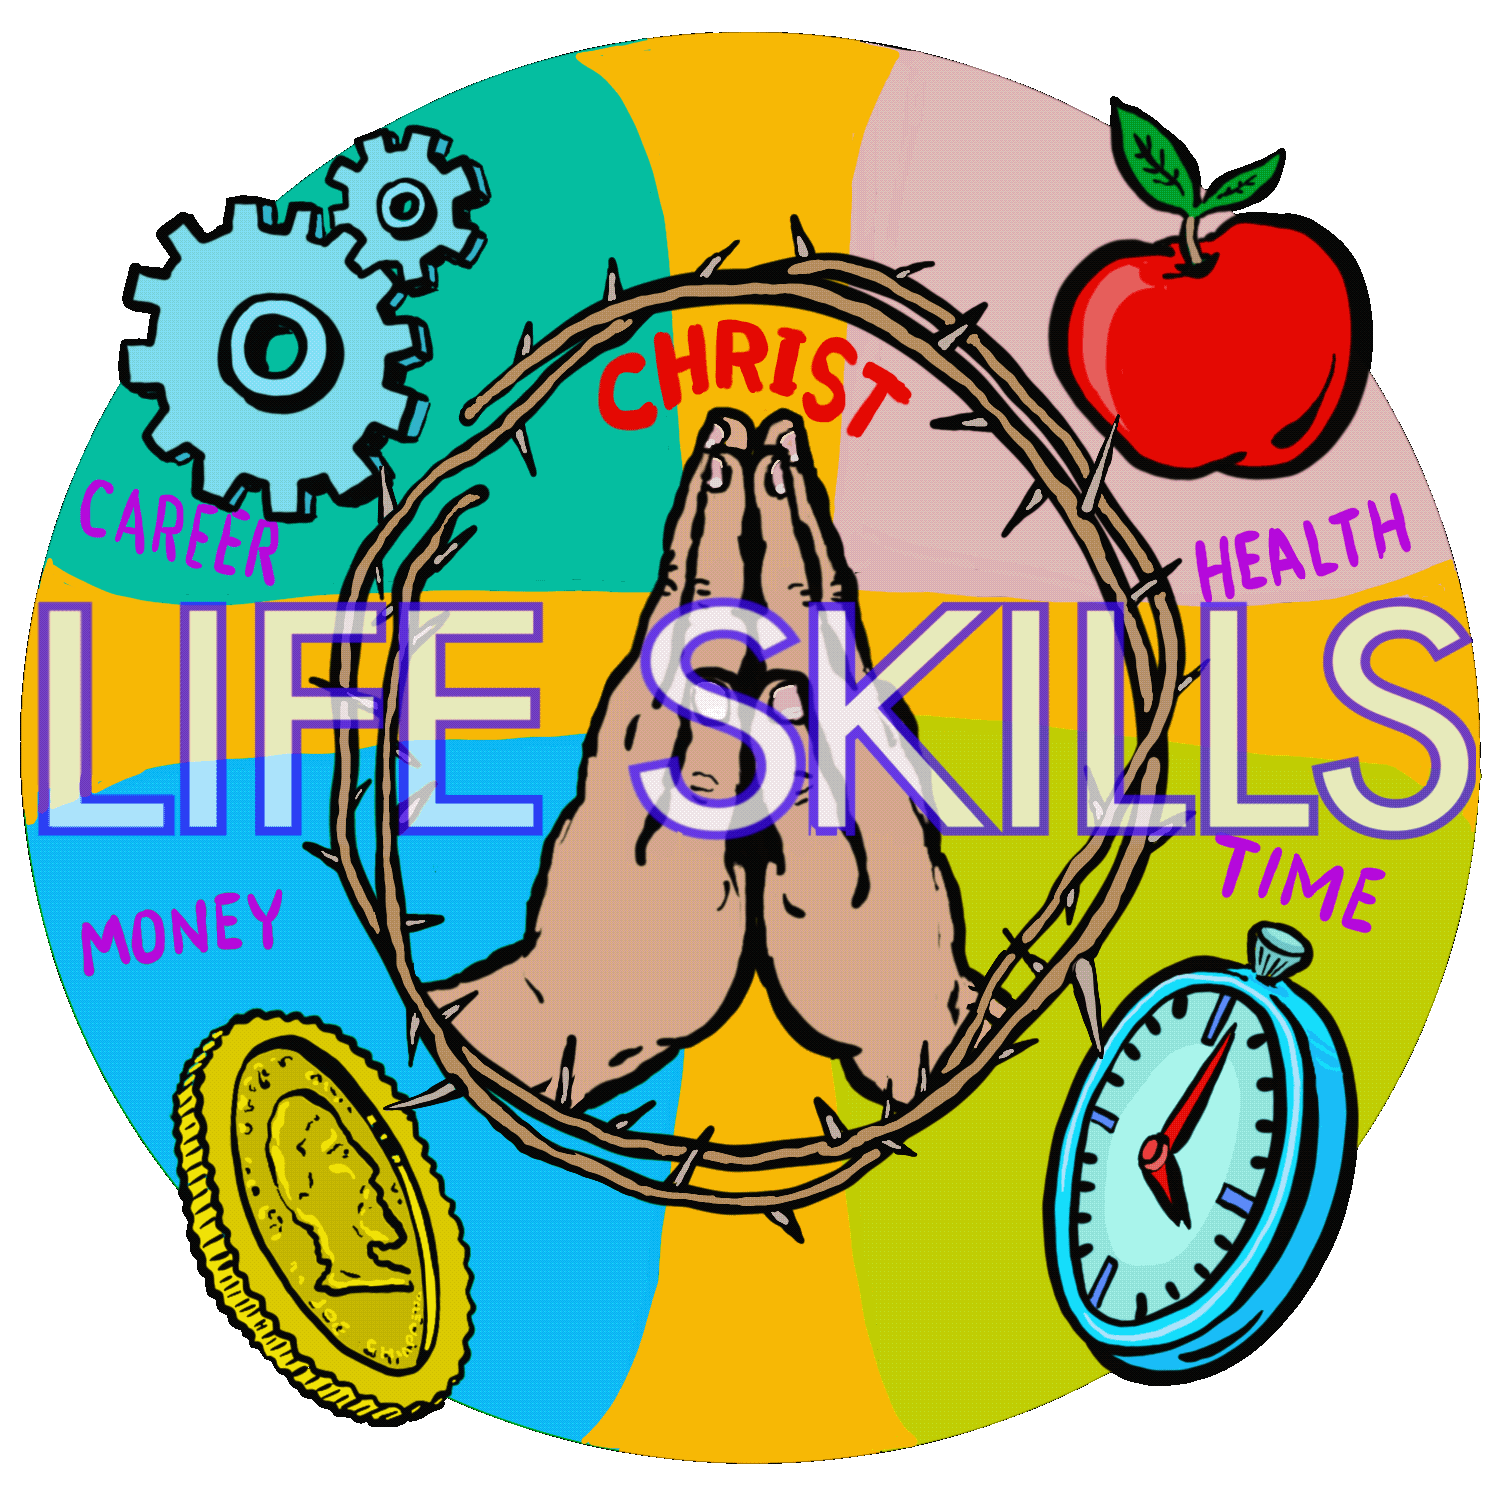 Life Skills book cover is also rare digital art by Joe Chiappetta called Life Skills: The Circle of Focus